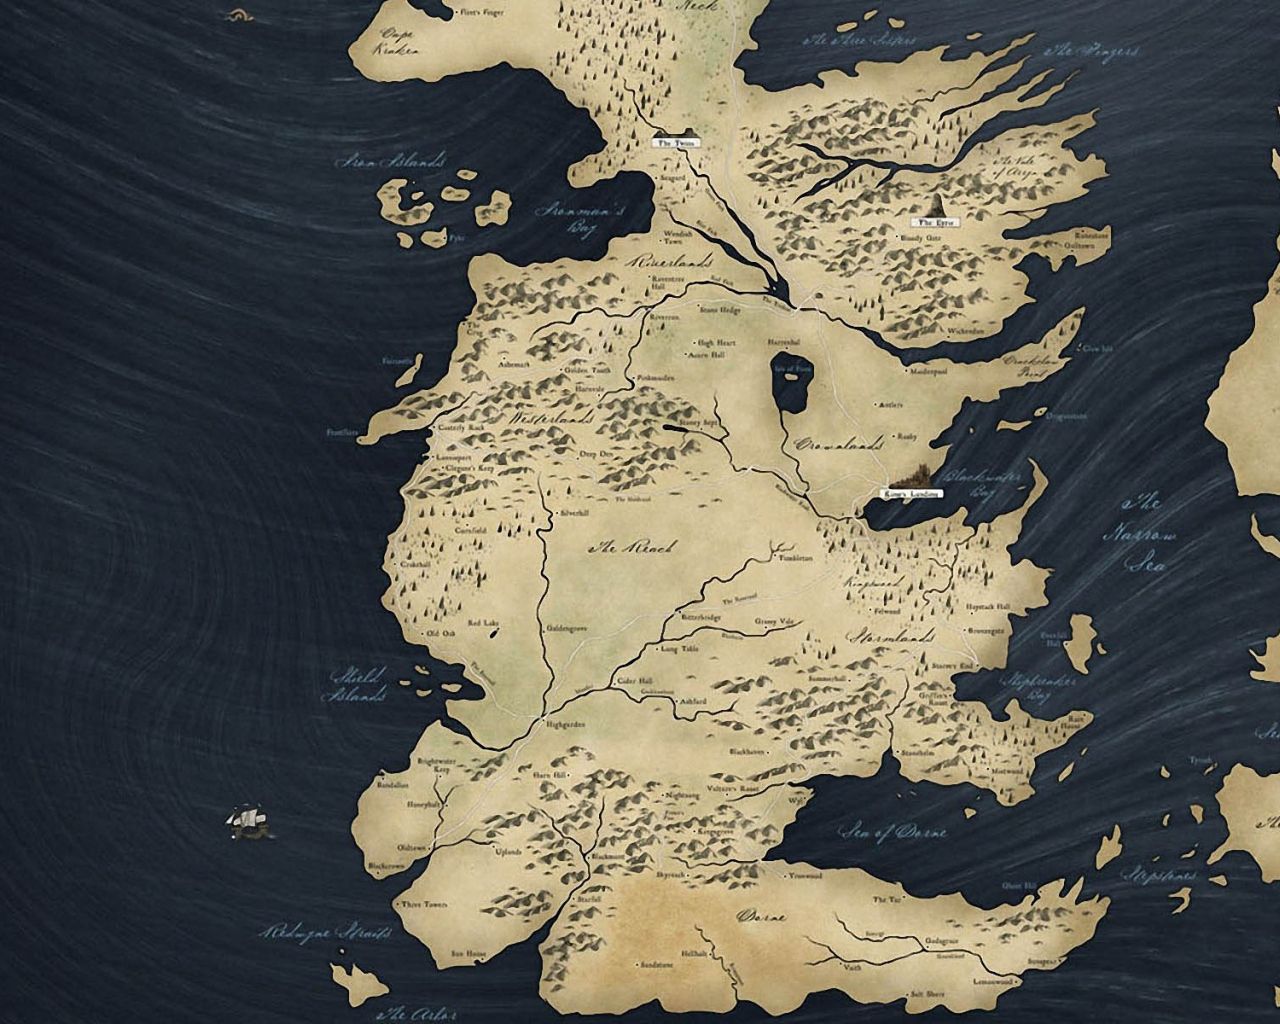 Westeros Map Projects | Photos, videos, logos, illustrations and branding  on Behance